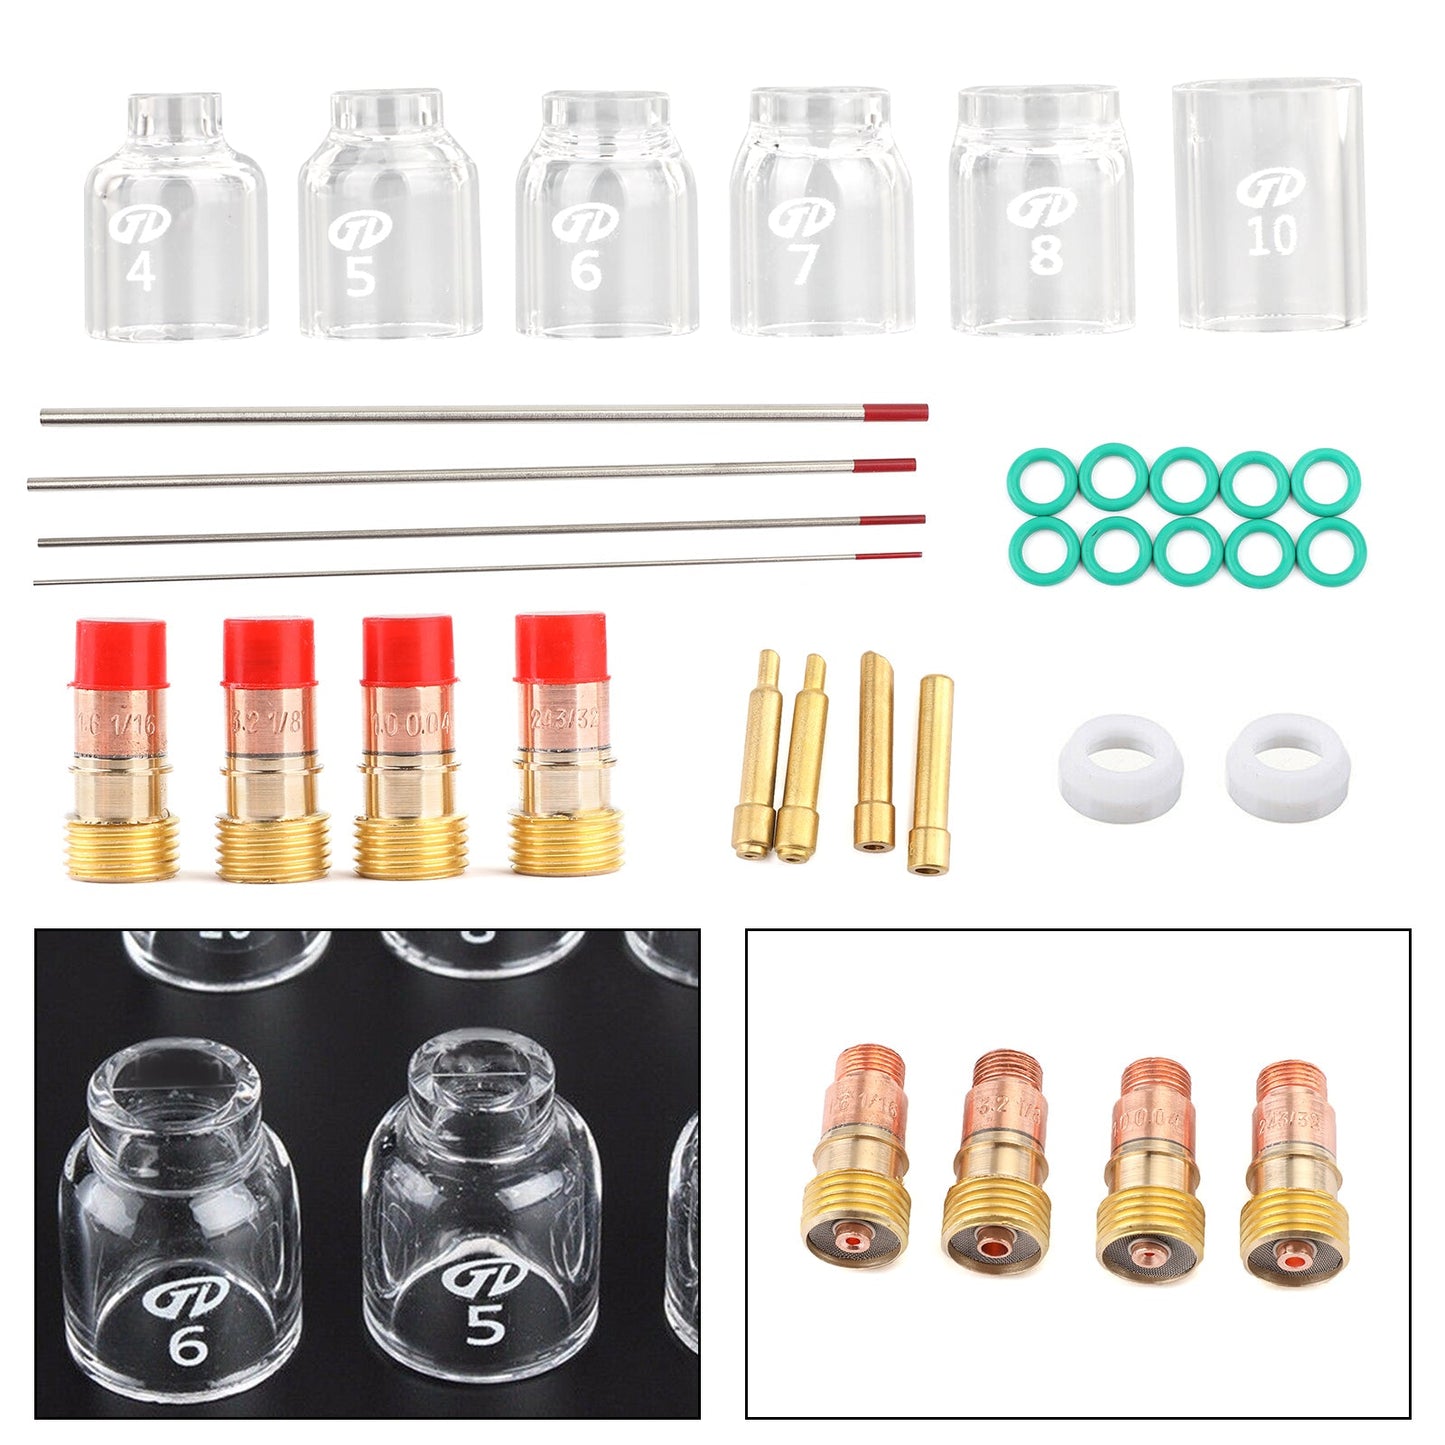 30Pcs TIG Welding Stubby Gas Lens Pyrex Cup Kit Fits For Tig WP-17/18/26 Torch